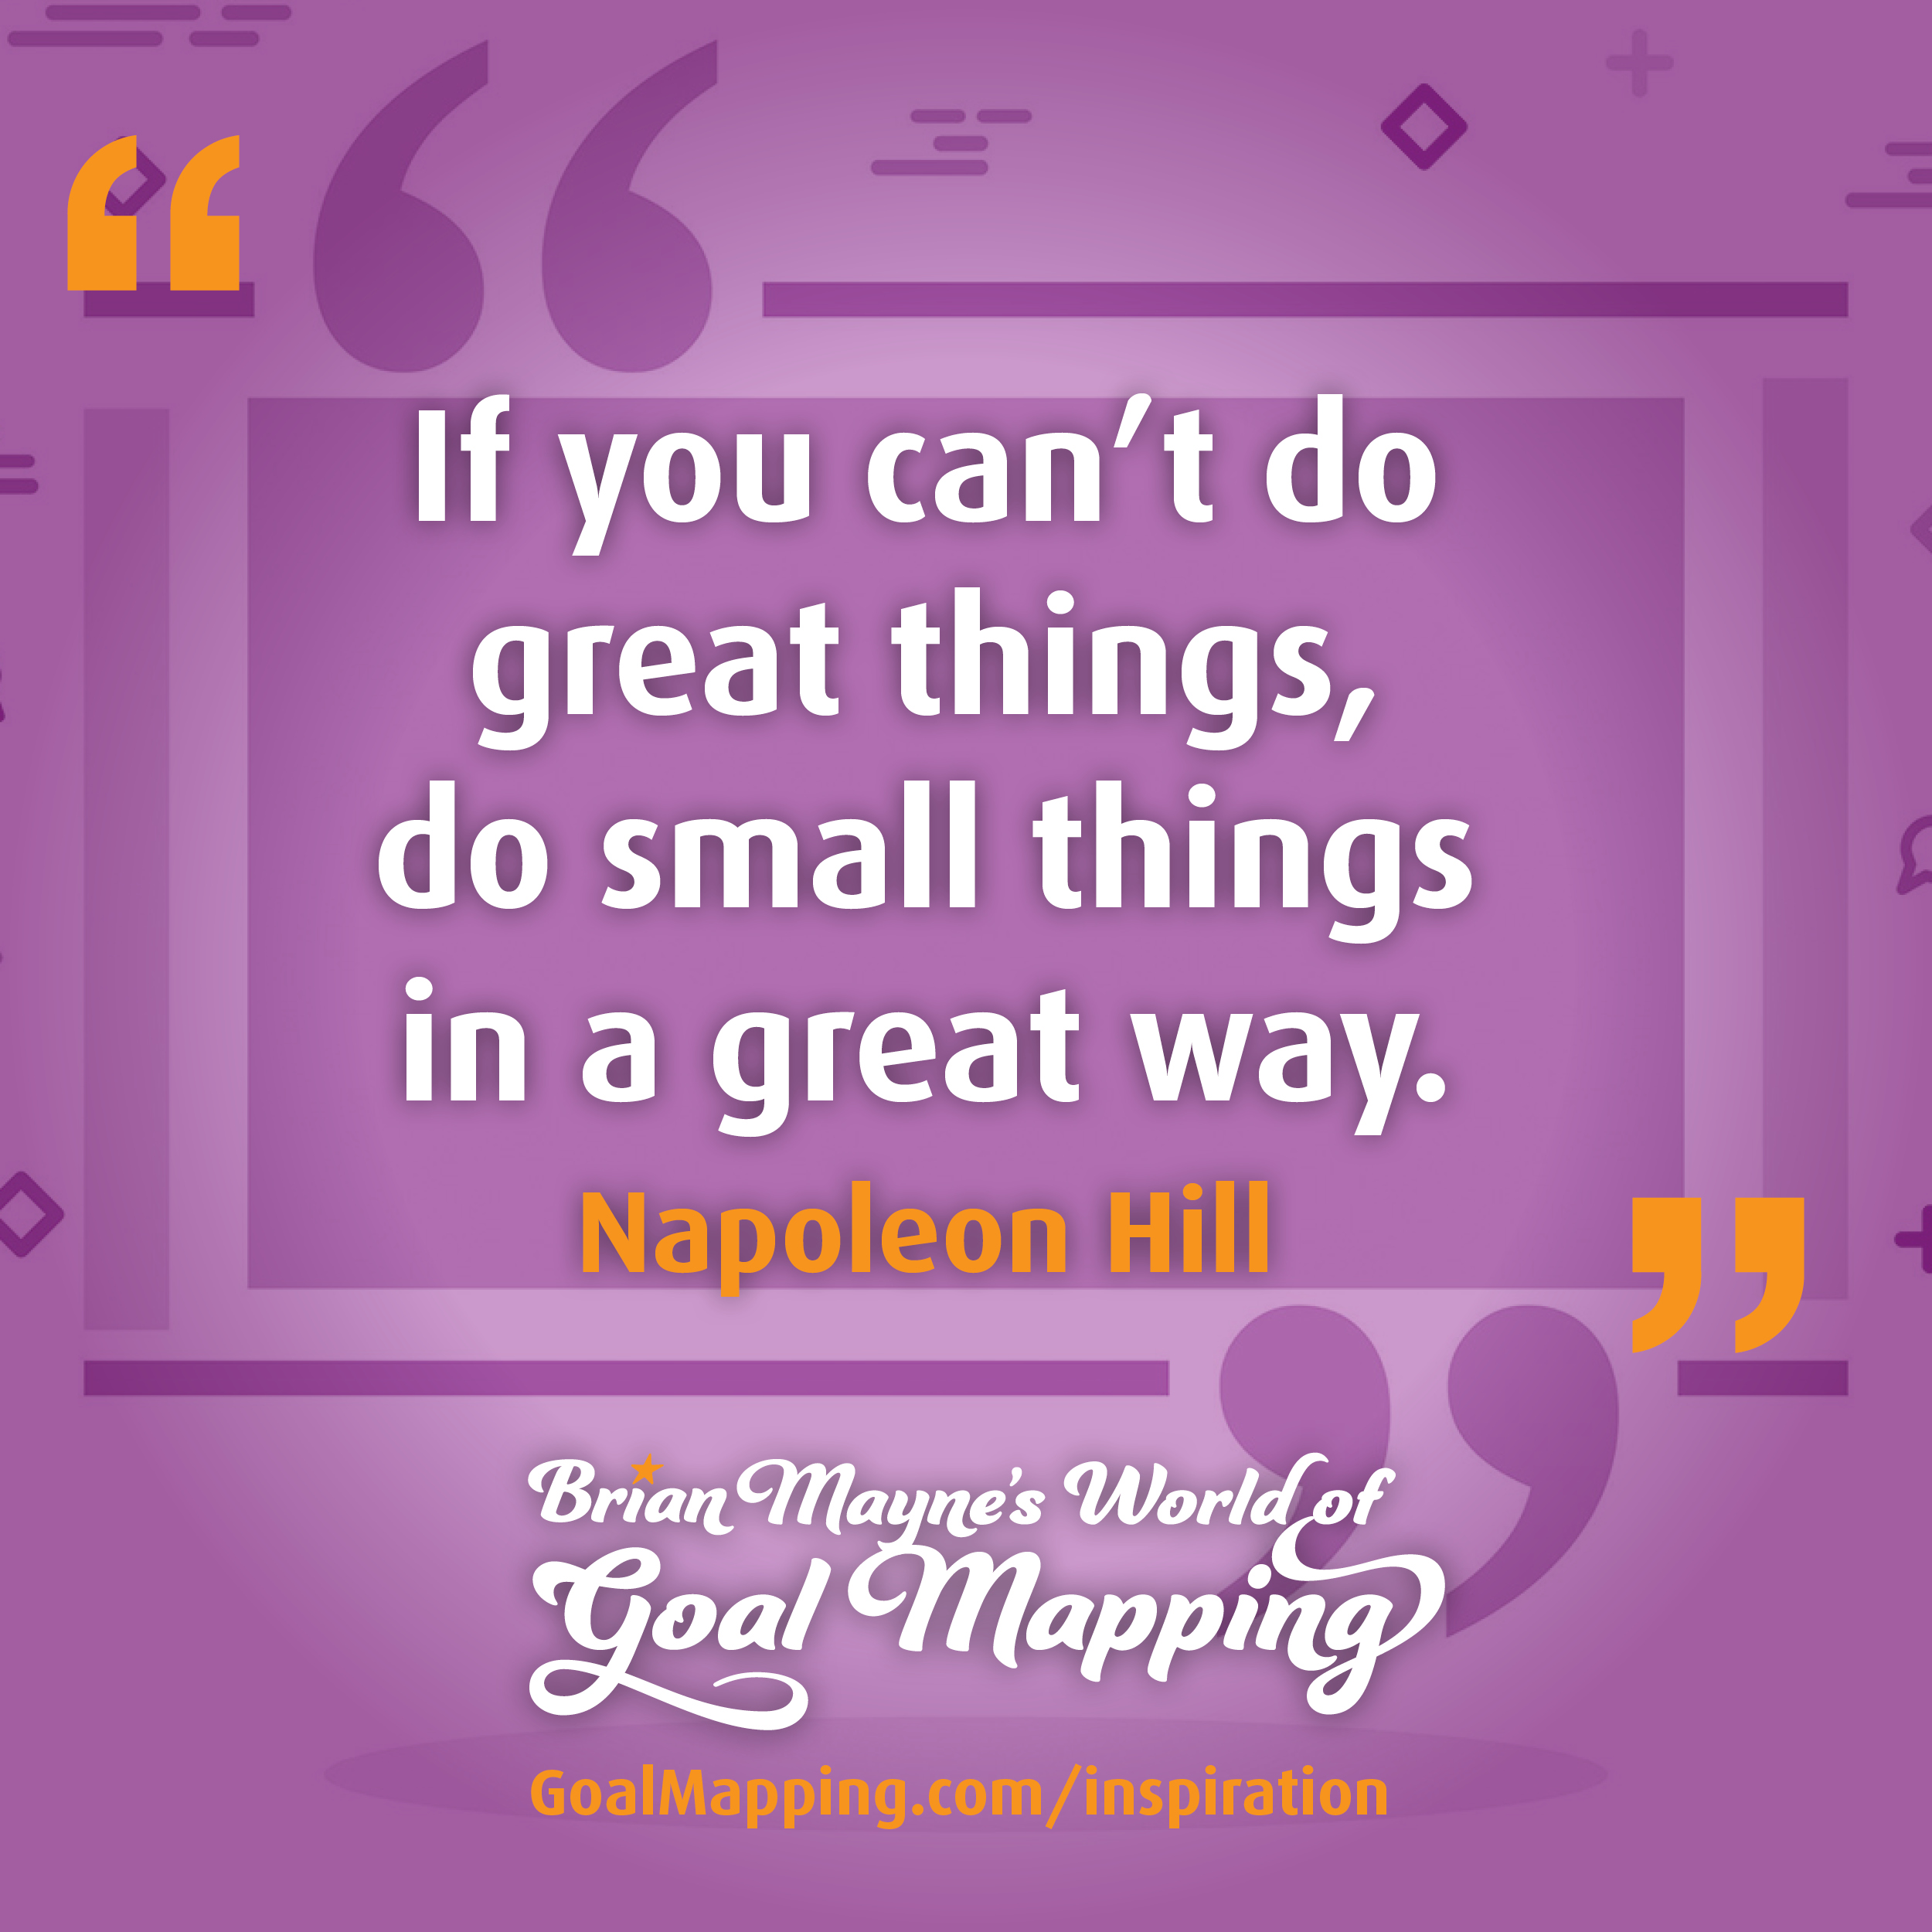 "If you can’t do great things, do small things in a great way." Napoleon Hill